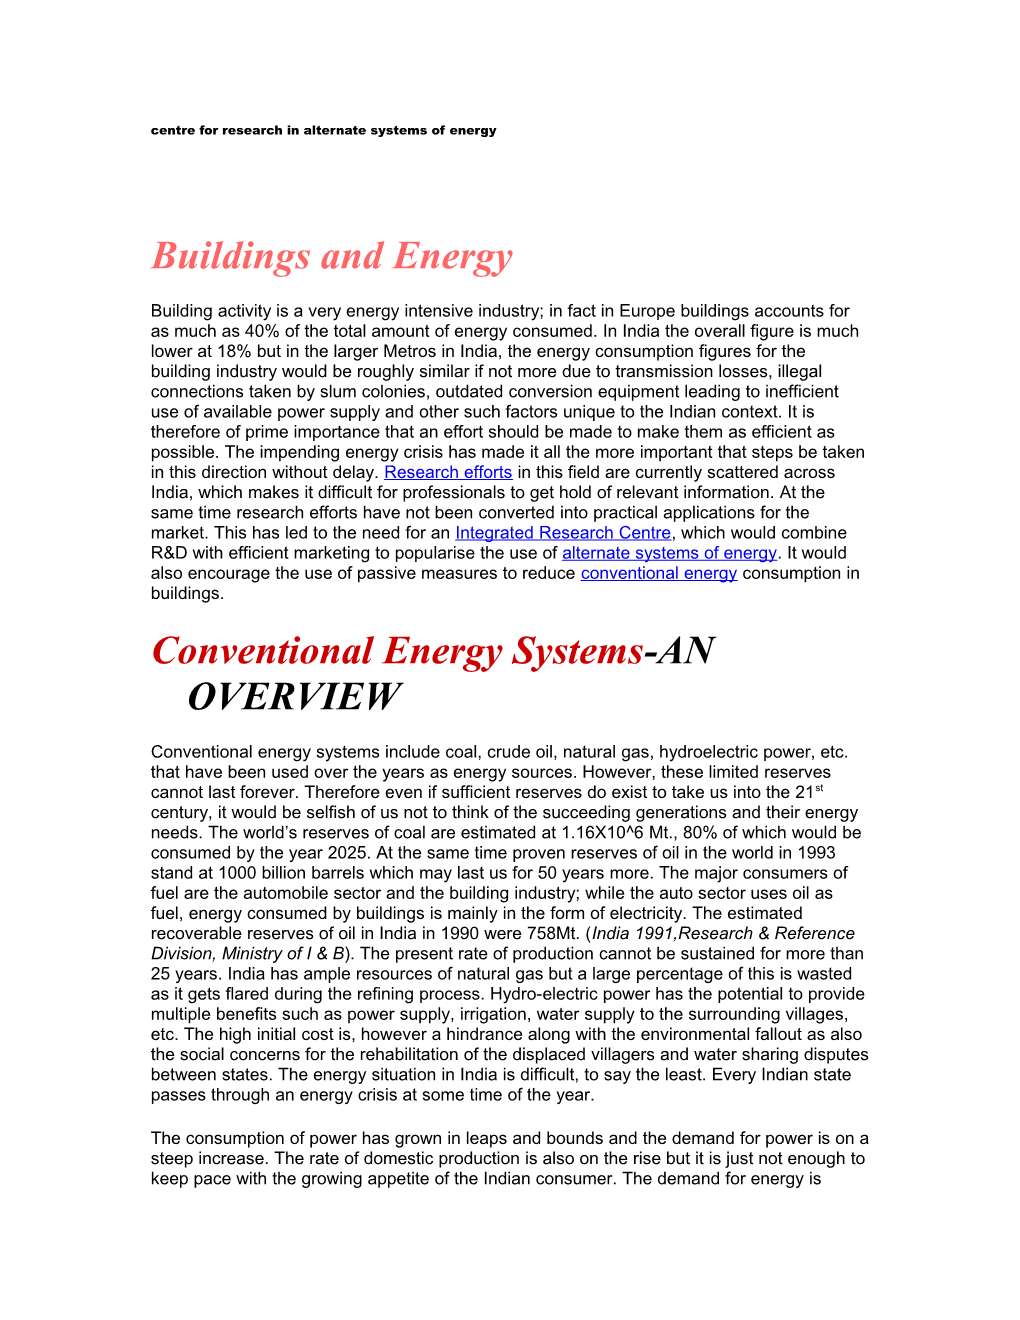 Centre for Research in Alternate Systems of Energy